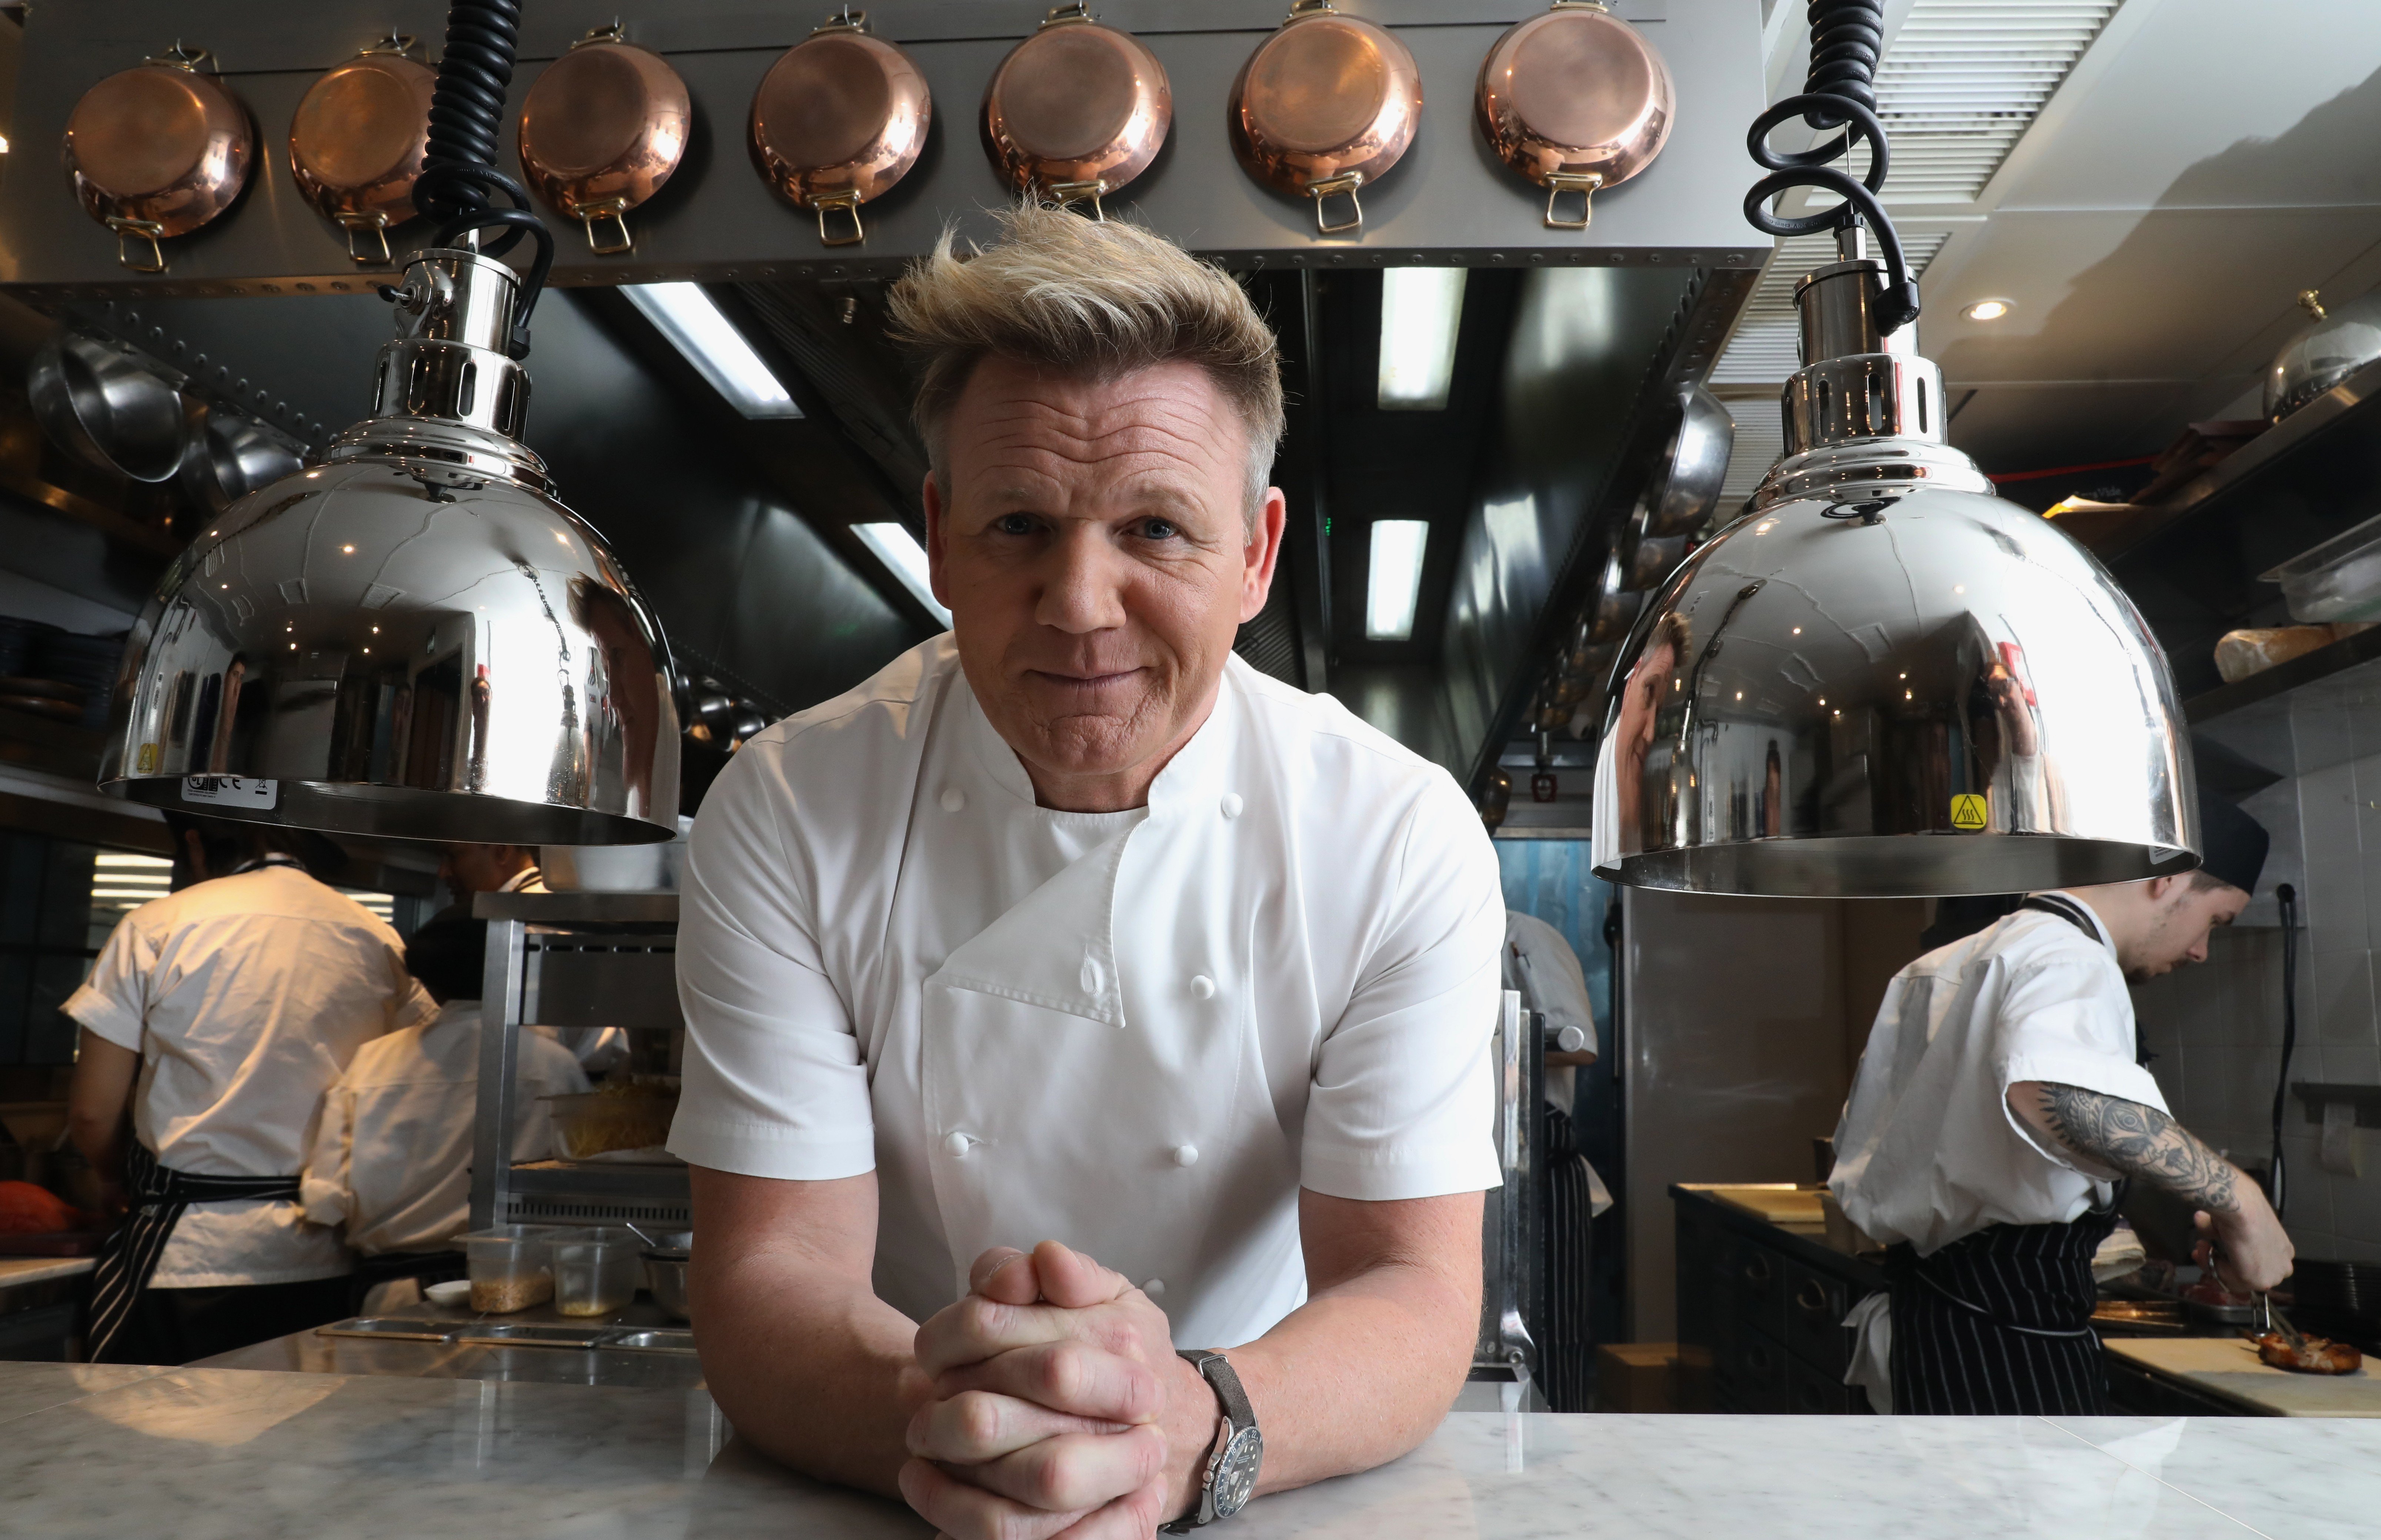 Gordon Ramsay I Never Wanted To Be A Tv Chef In Fact He Did Not Intend To Be A Chef At All South China Morning Post